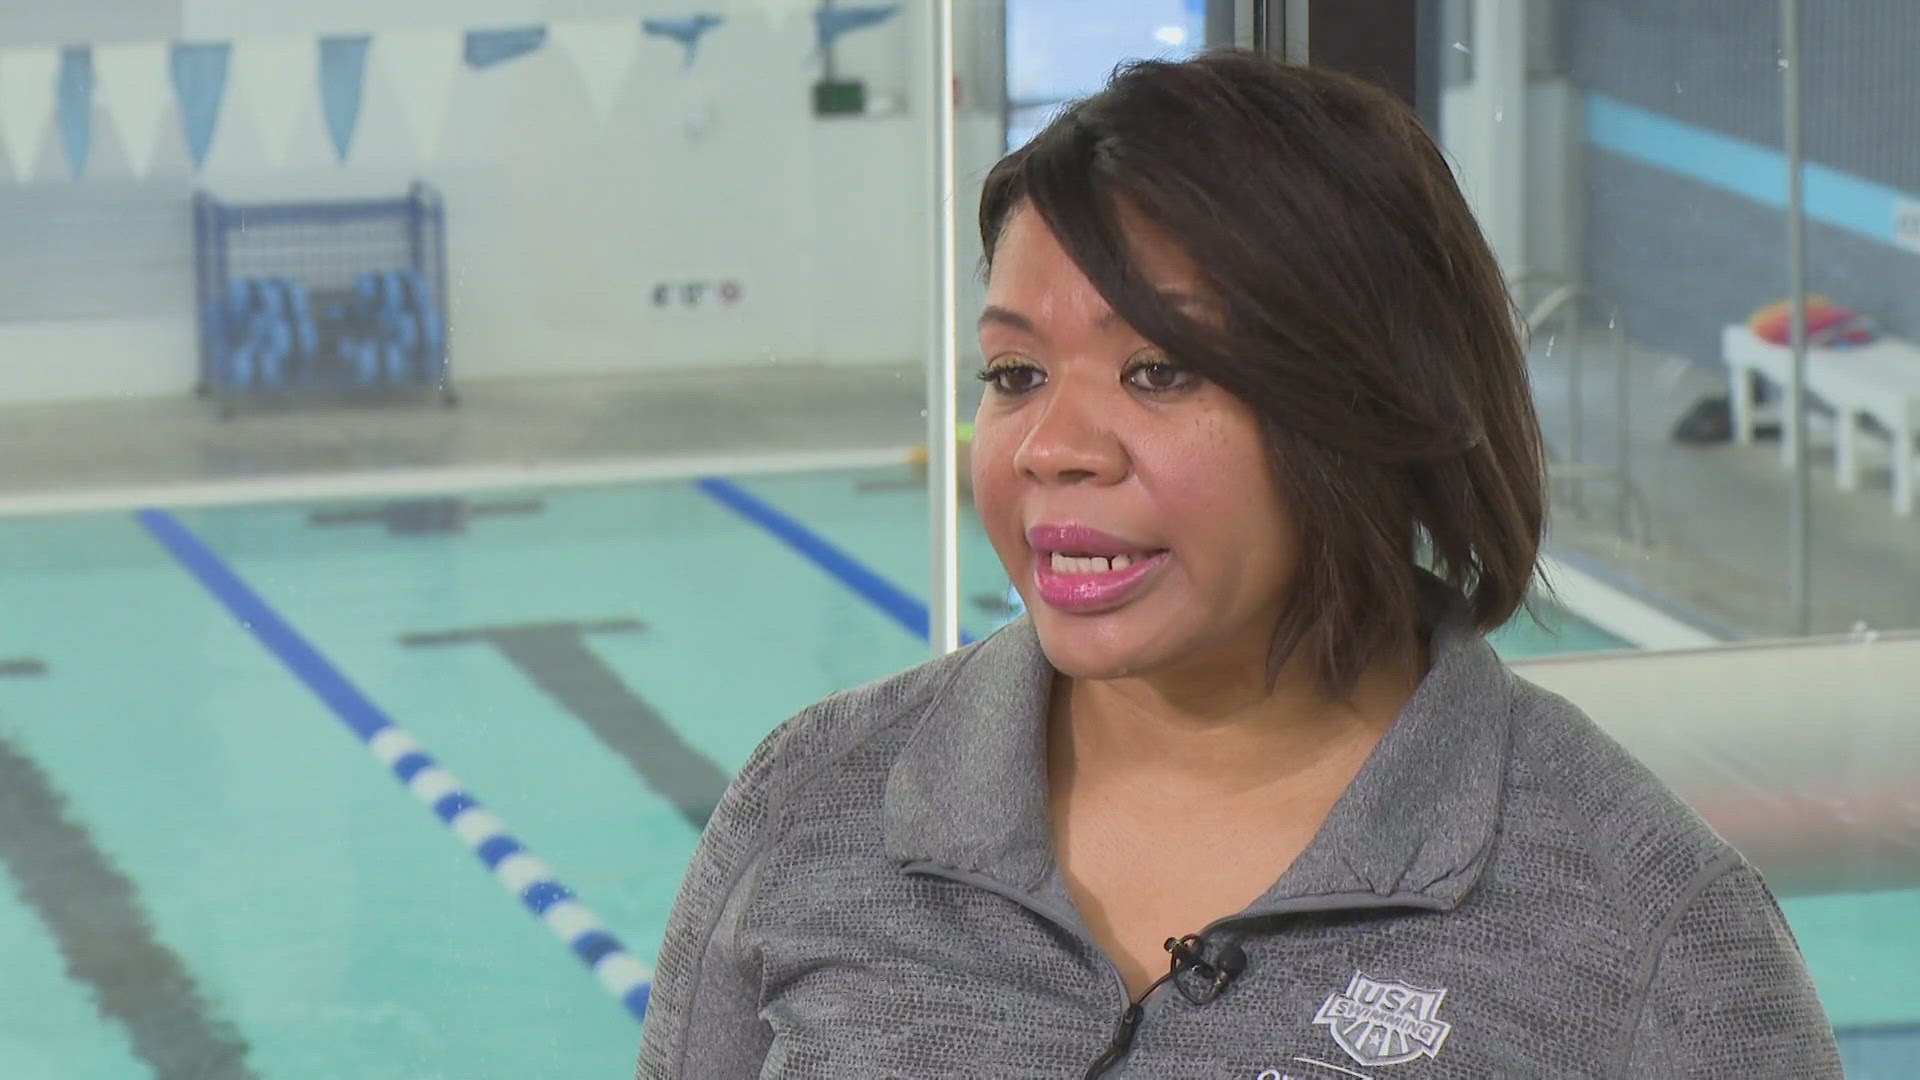 13News anchor Anne Marie Tiernon tells the story about Kim Thomas' journey to learn to swim at age 51 and why it's so important.